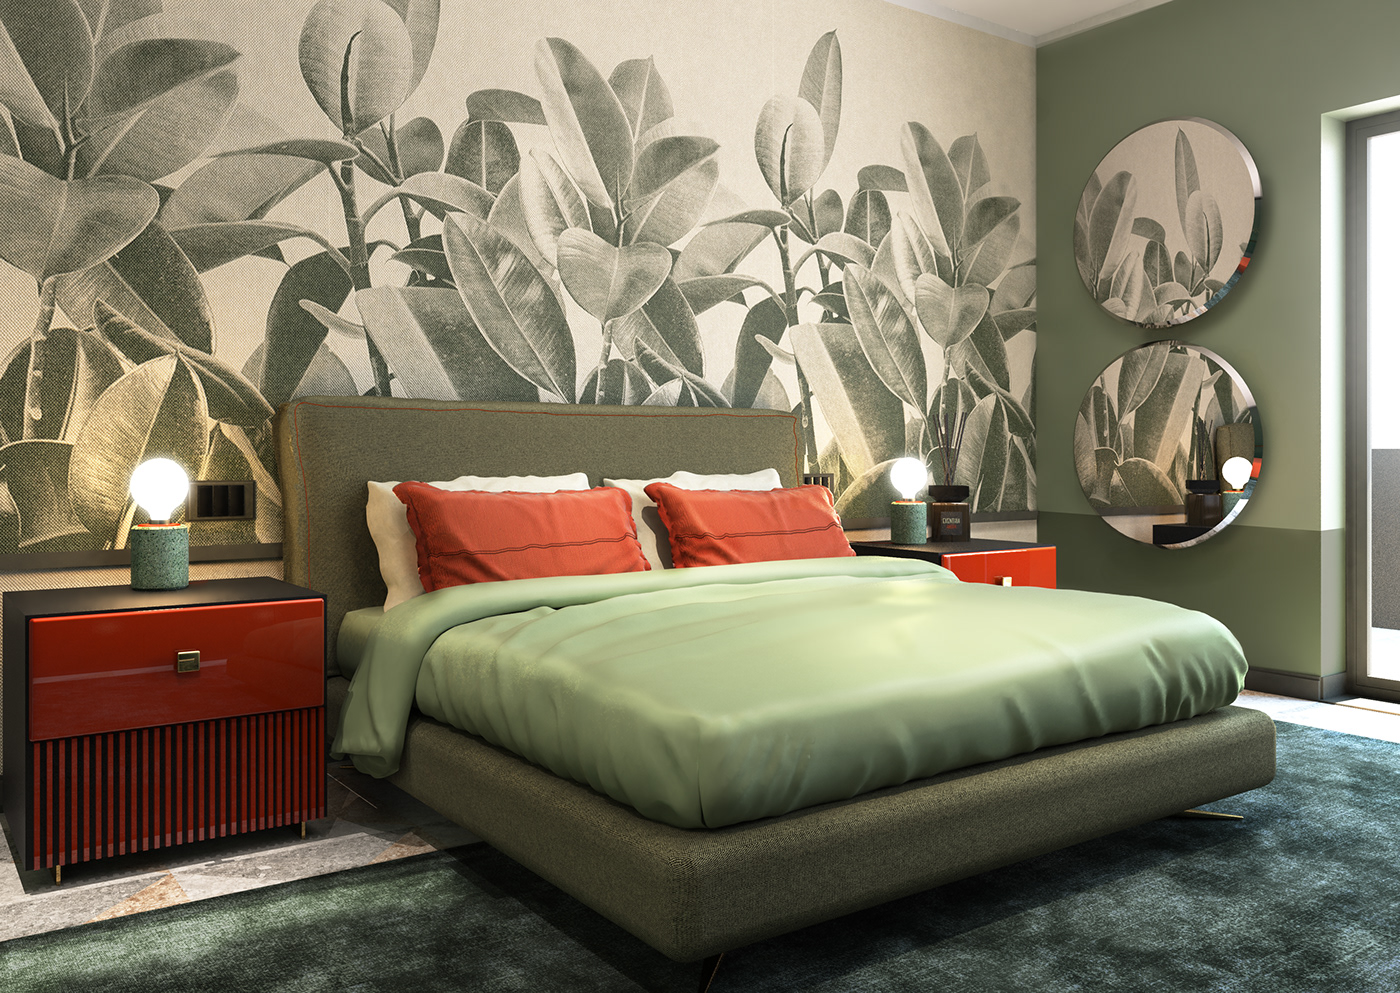 home Interior design interior design  architecture Sage modern green orange Project new project house living room bed room bathroom dining room room rooms ied Istituto Europeo Di Design Turin torino